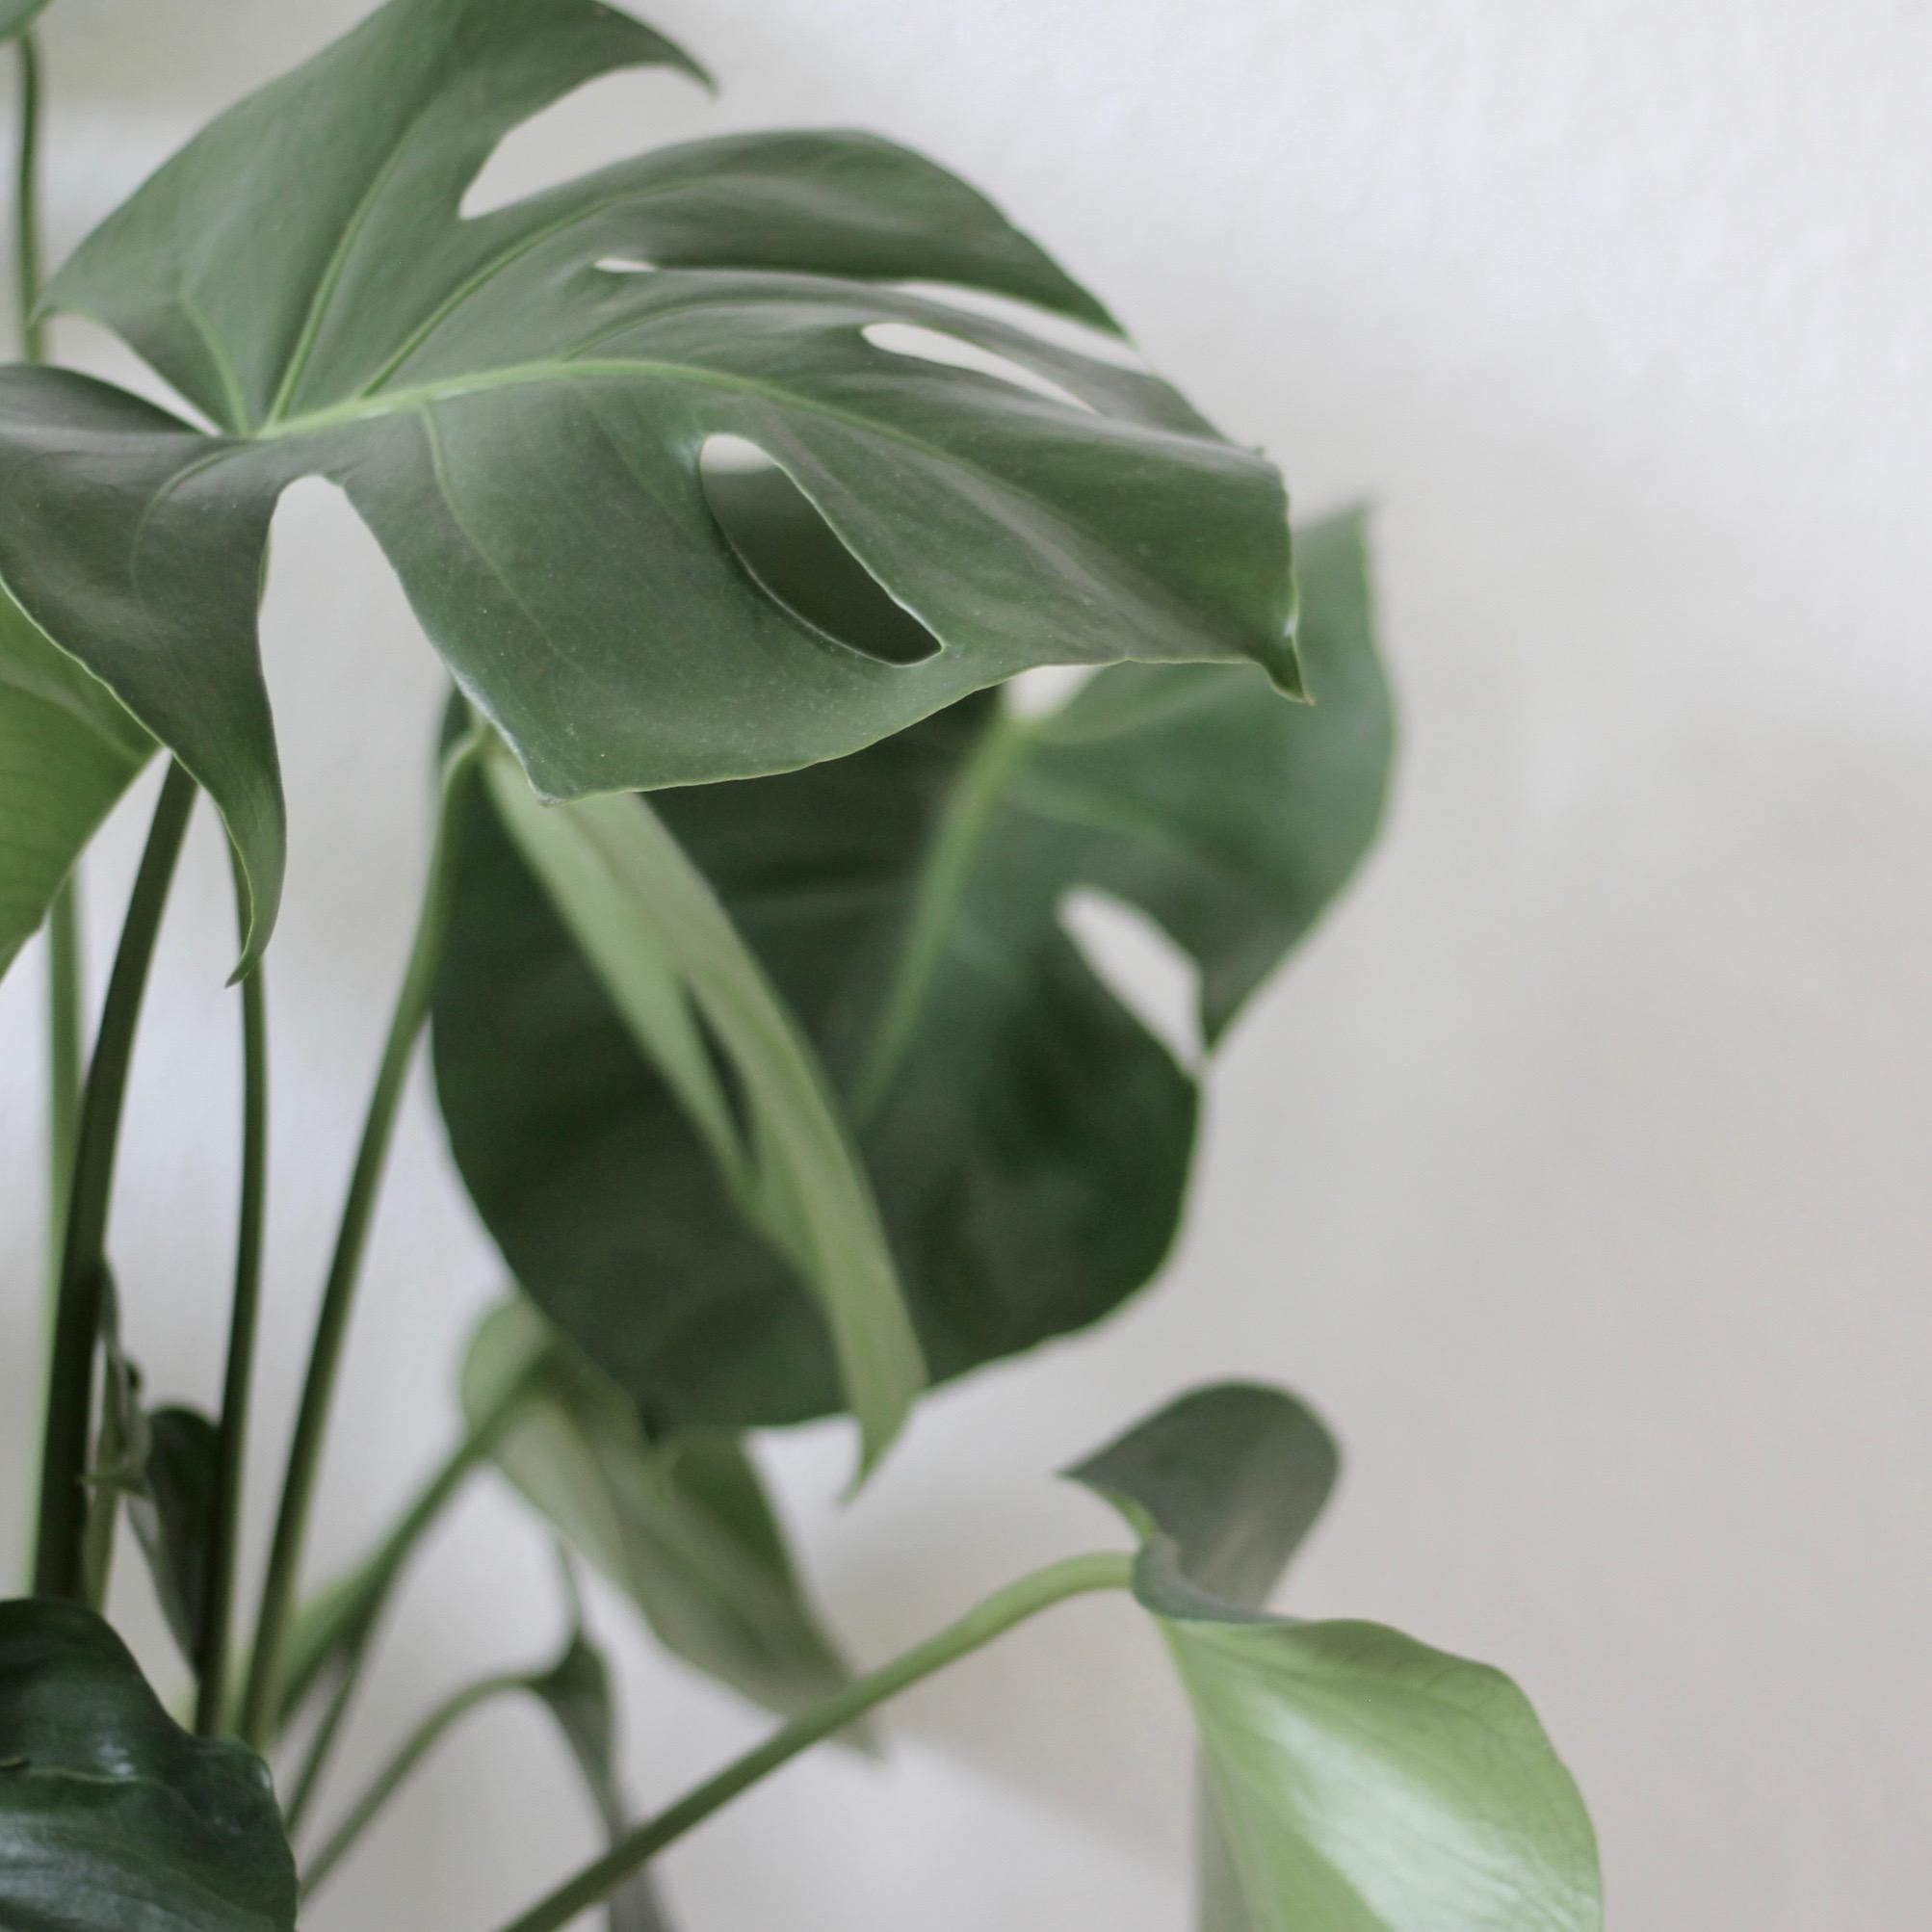 Monsteralove! #plants #monstera #nature #protectwhatyoulove